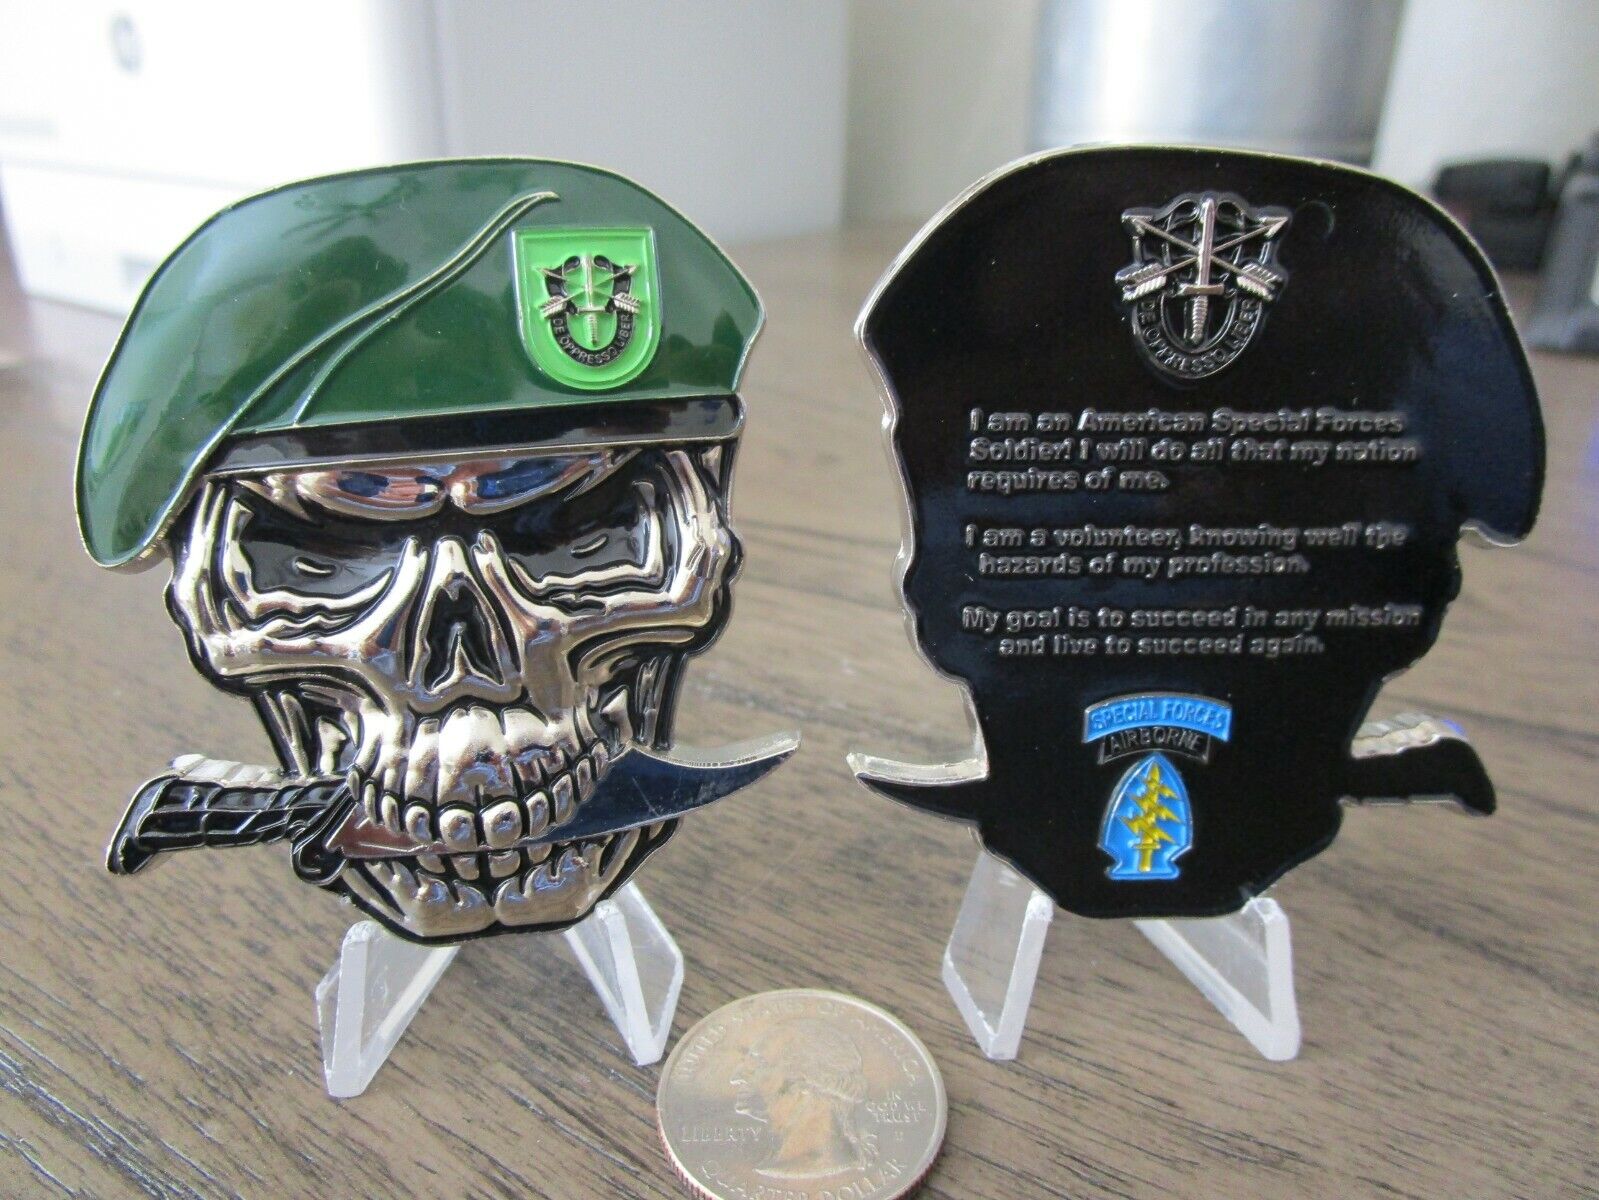 US Army Special Forces Group Creed Green Berets 10th SFG A Skull Challenge Coin